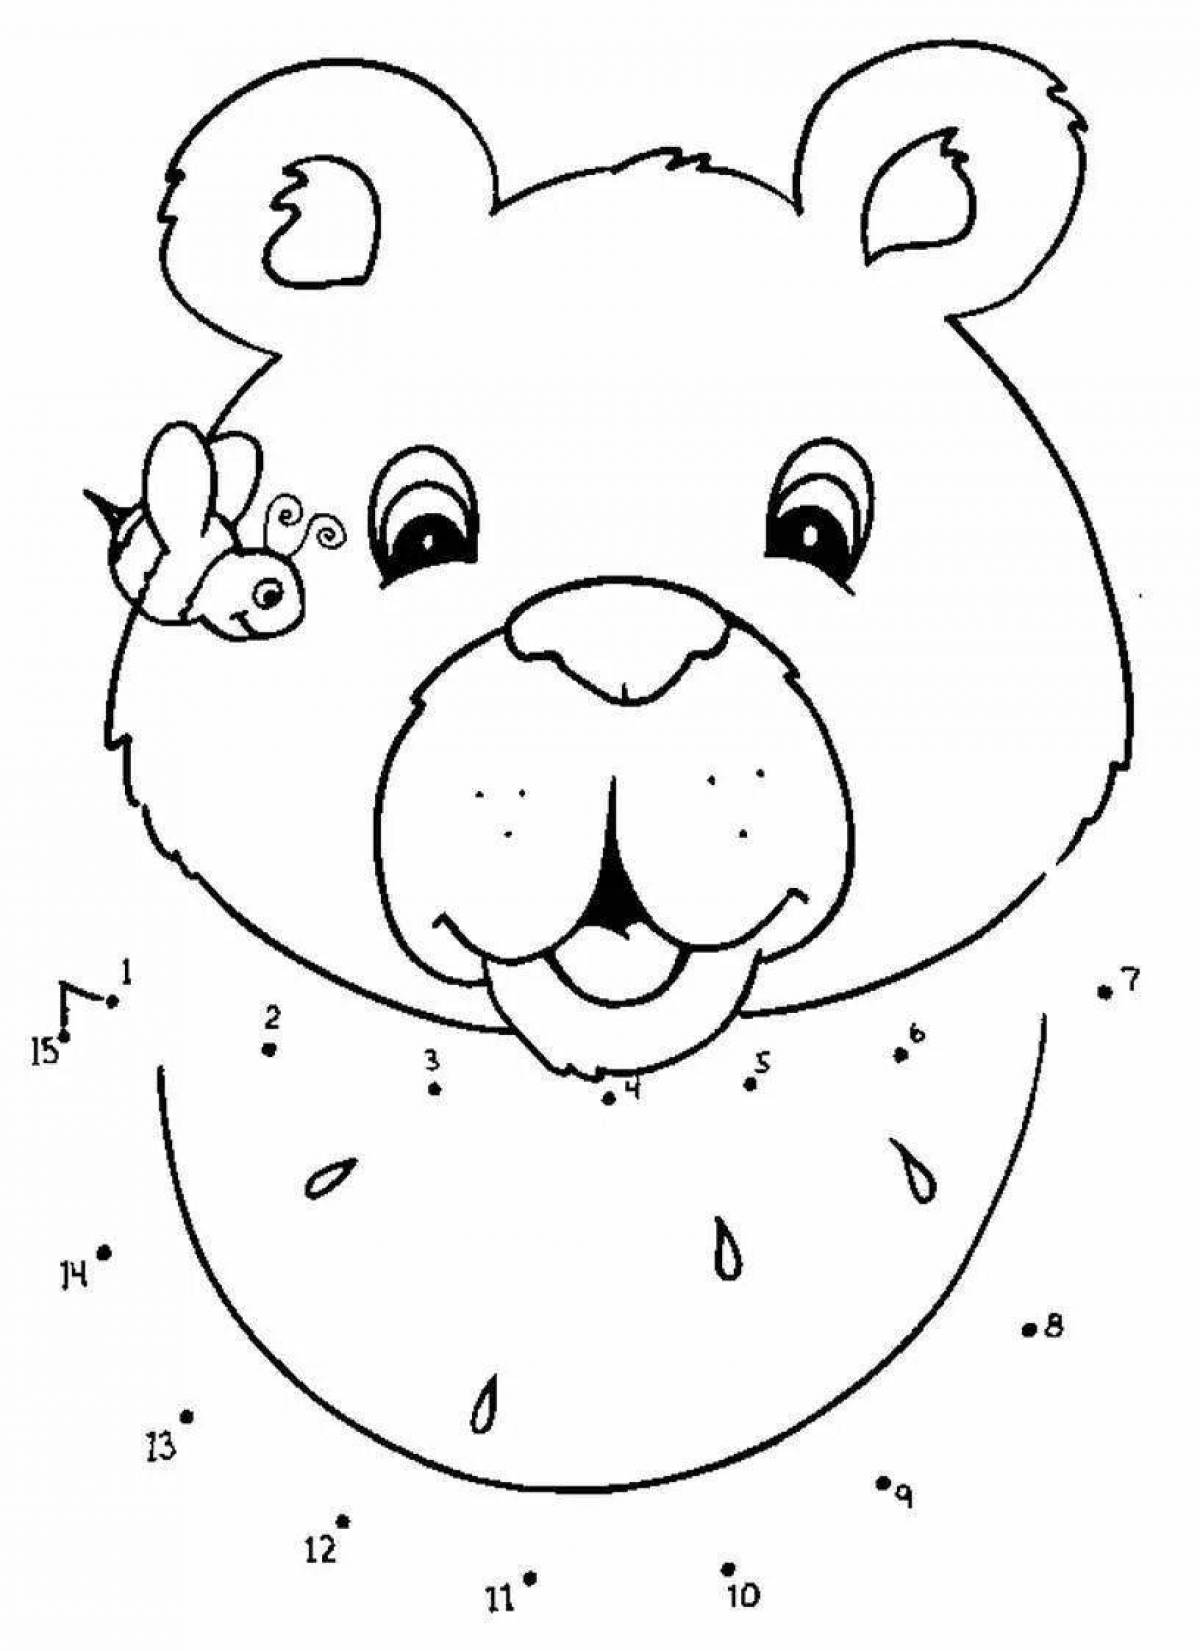 Glowing bear coloring page with polka dots